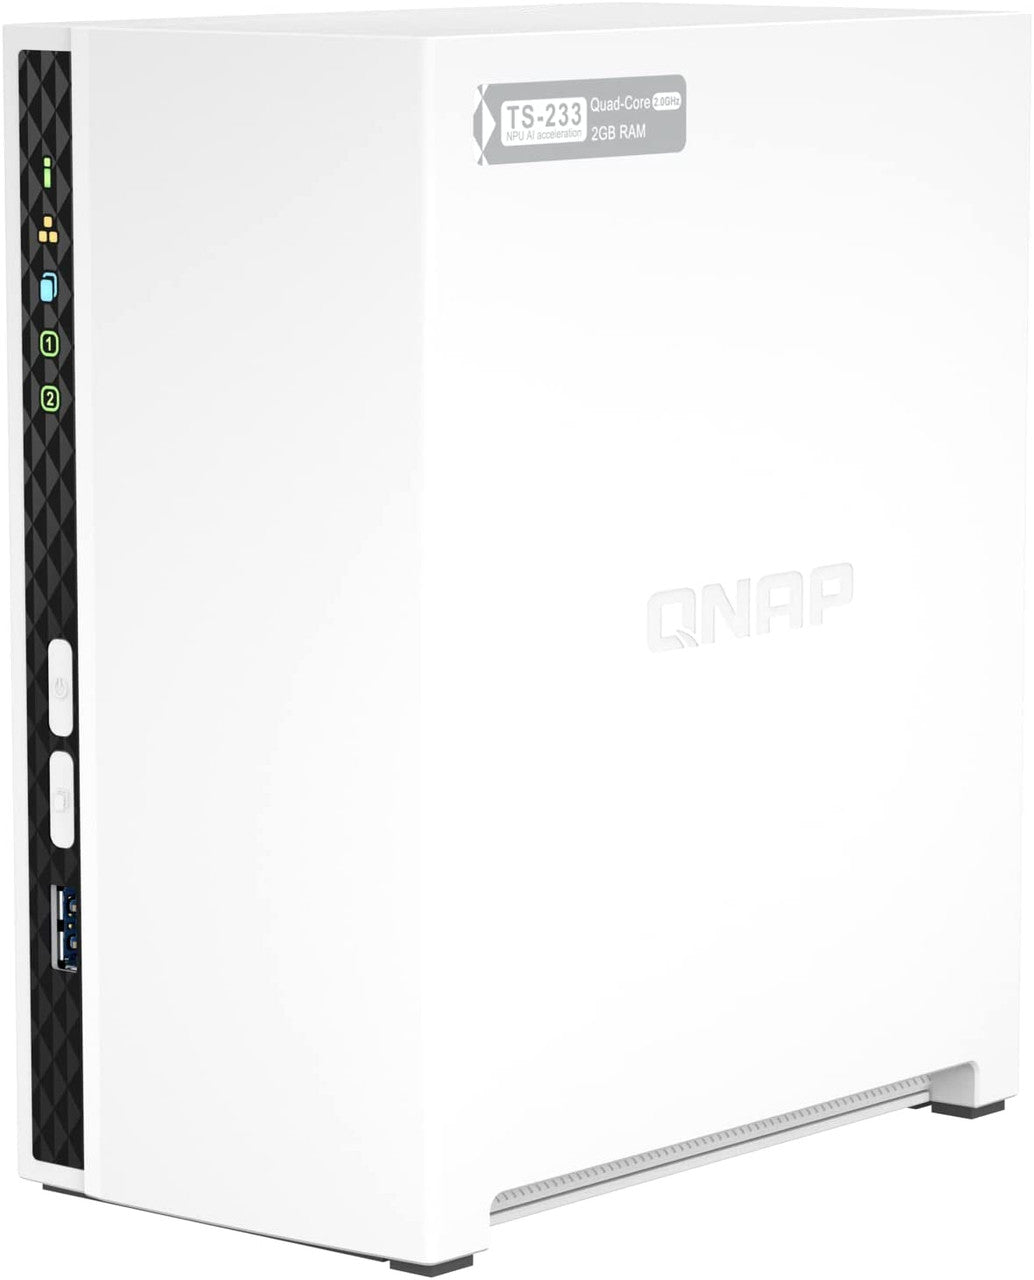 QNAP TS-233 2-Bay Desktop NAS with a 24TB (2 x 12TB) of Western Digital Red Plus Drives Fully Assembled and Tested